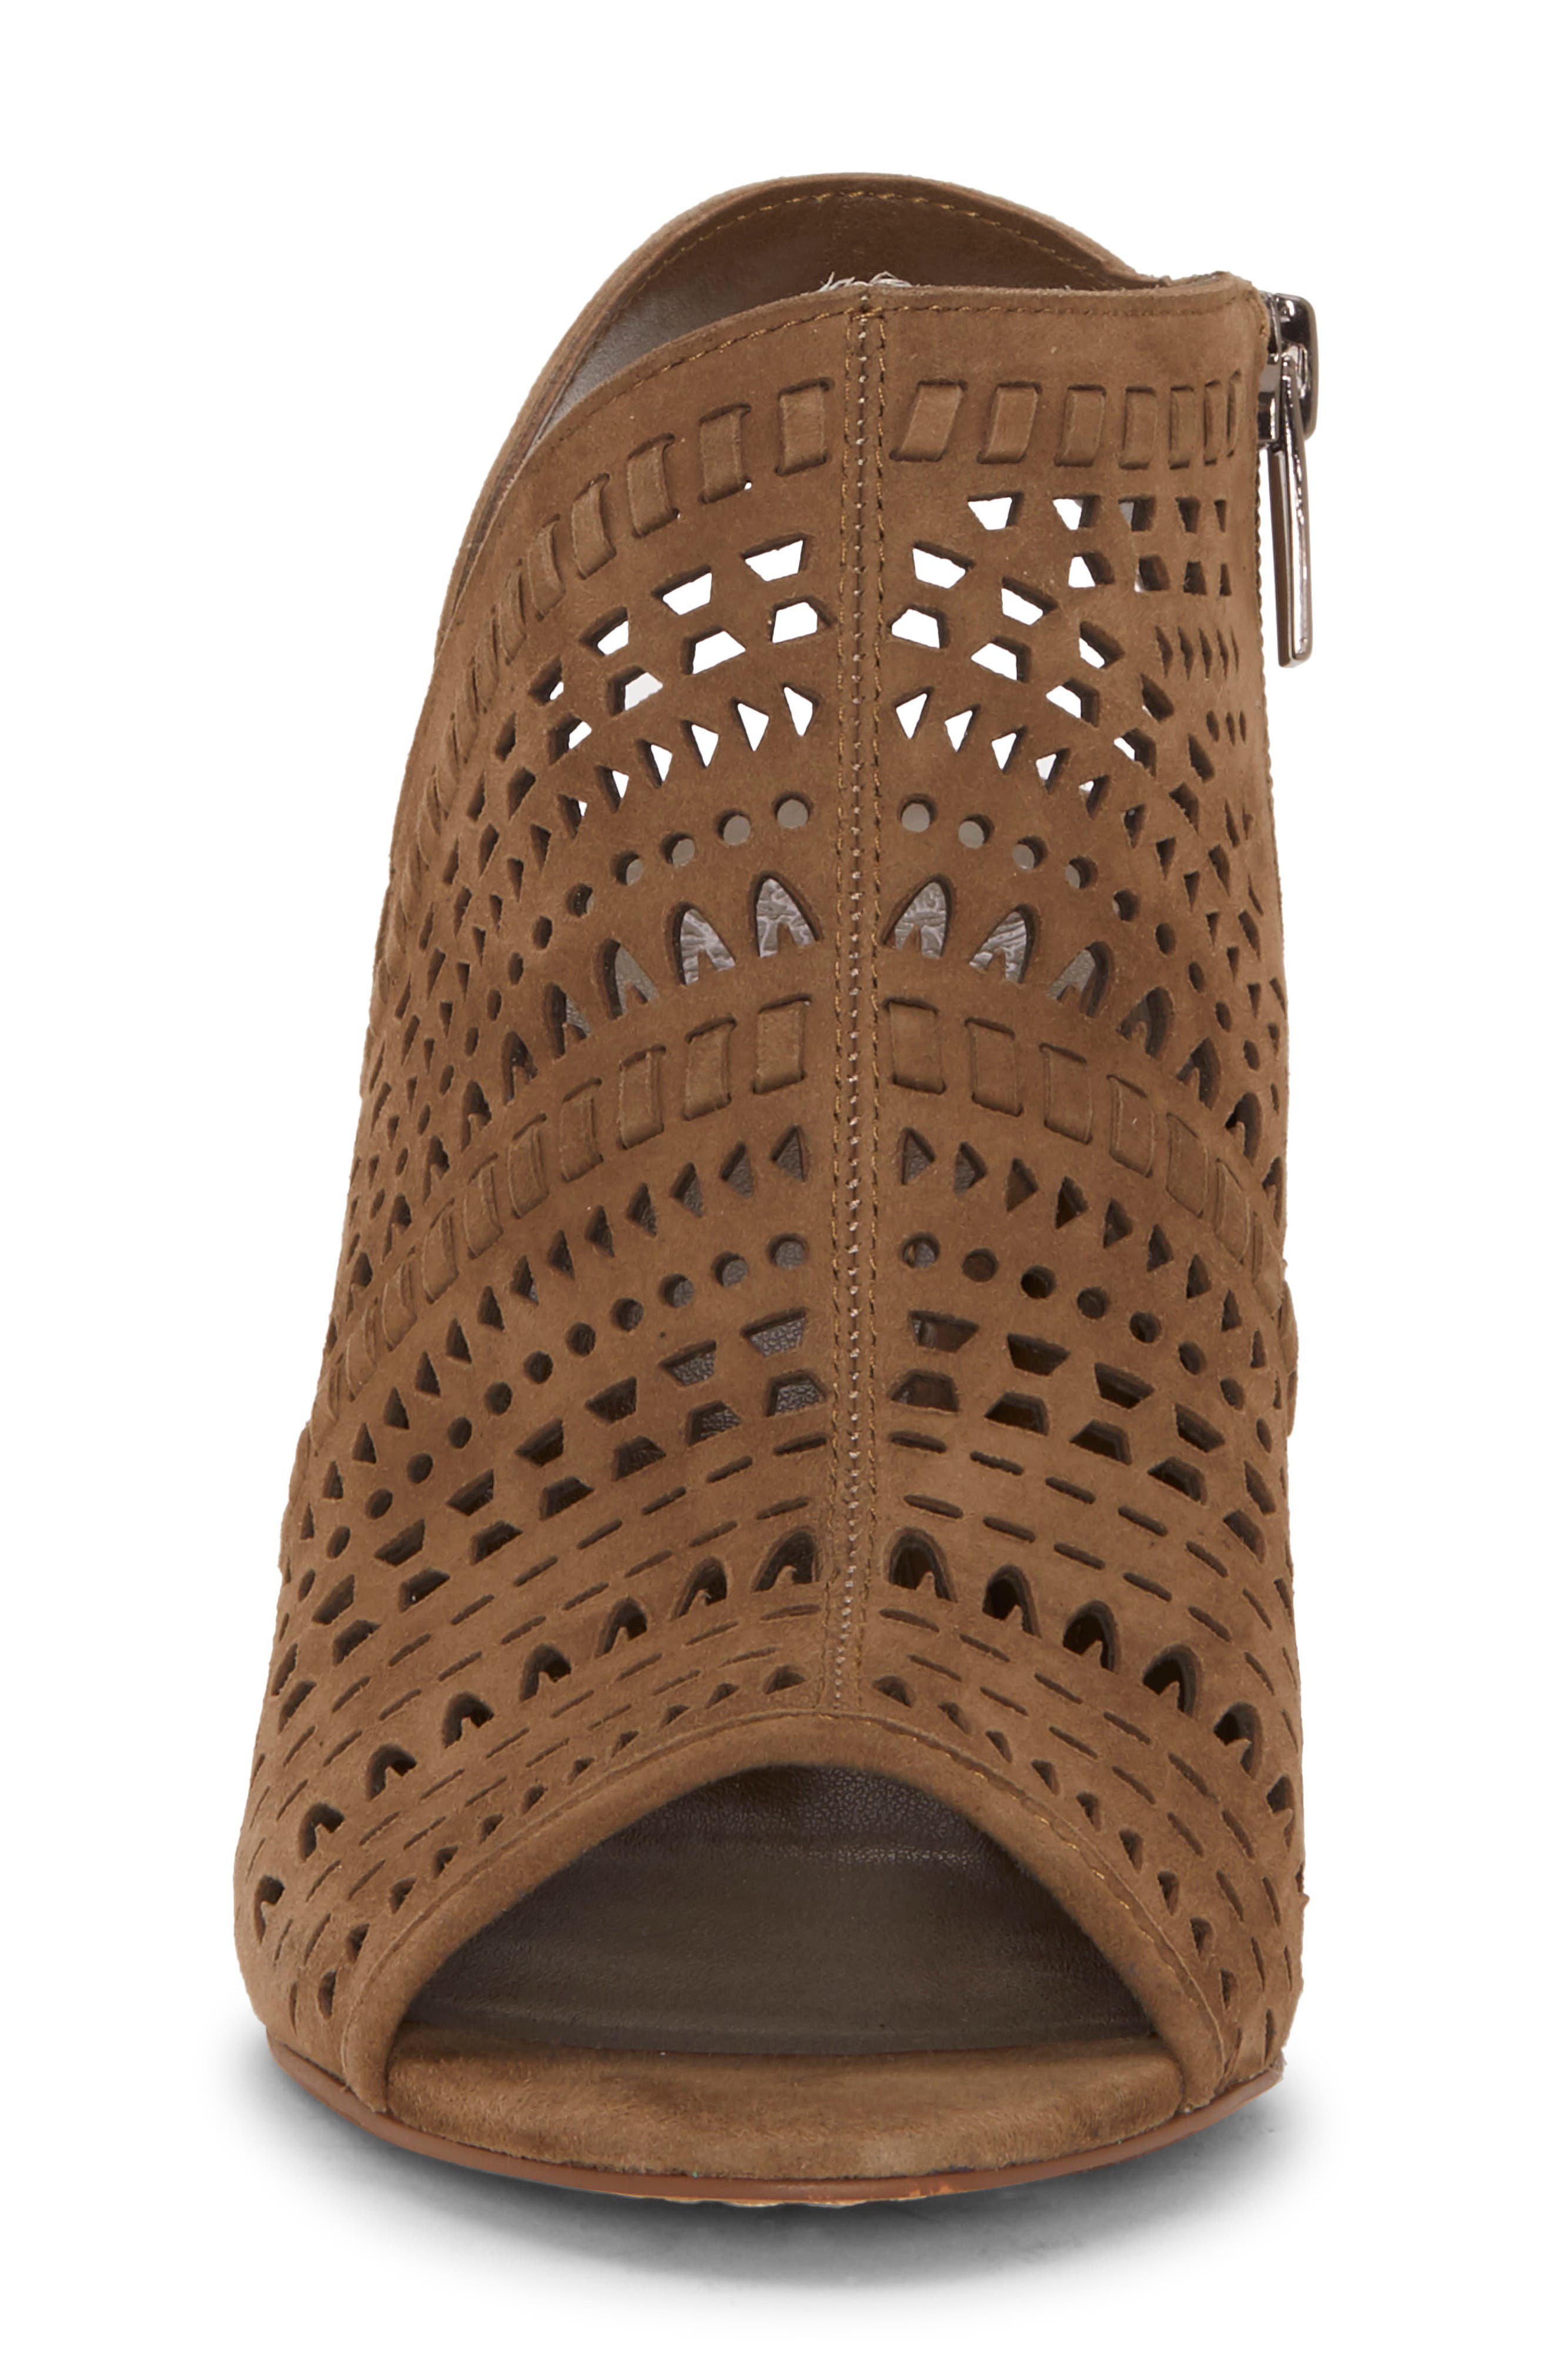 Vince Camuto | Derechie Perforated 